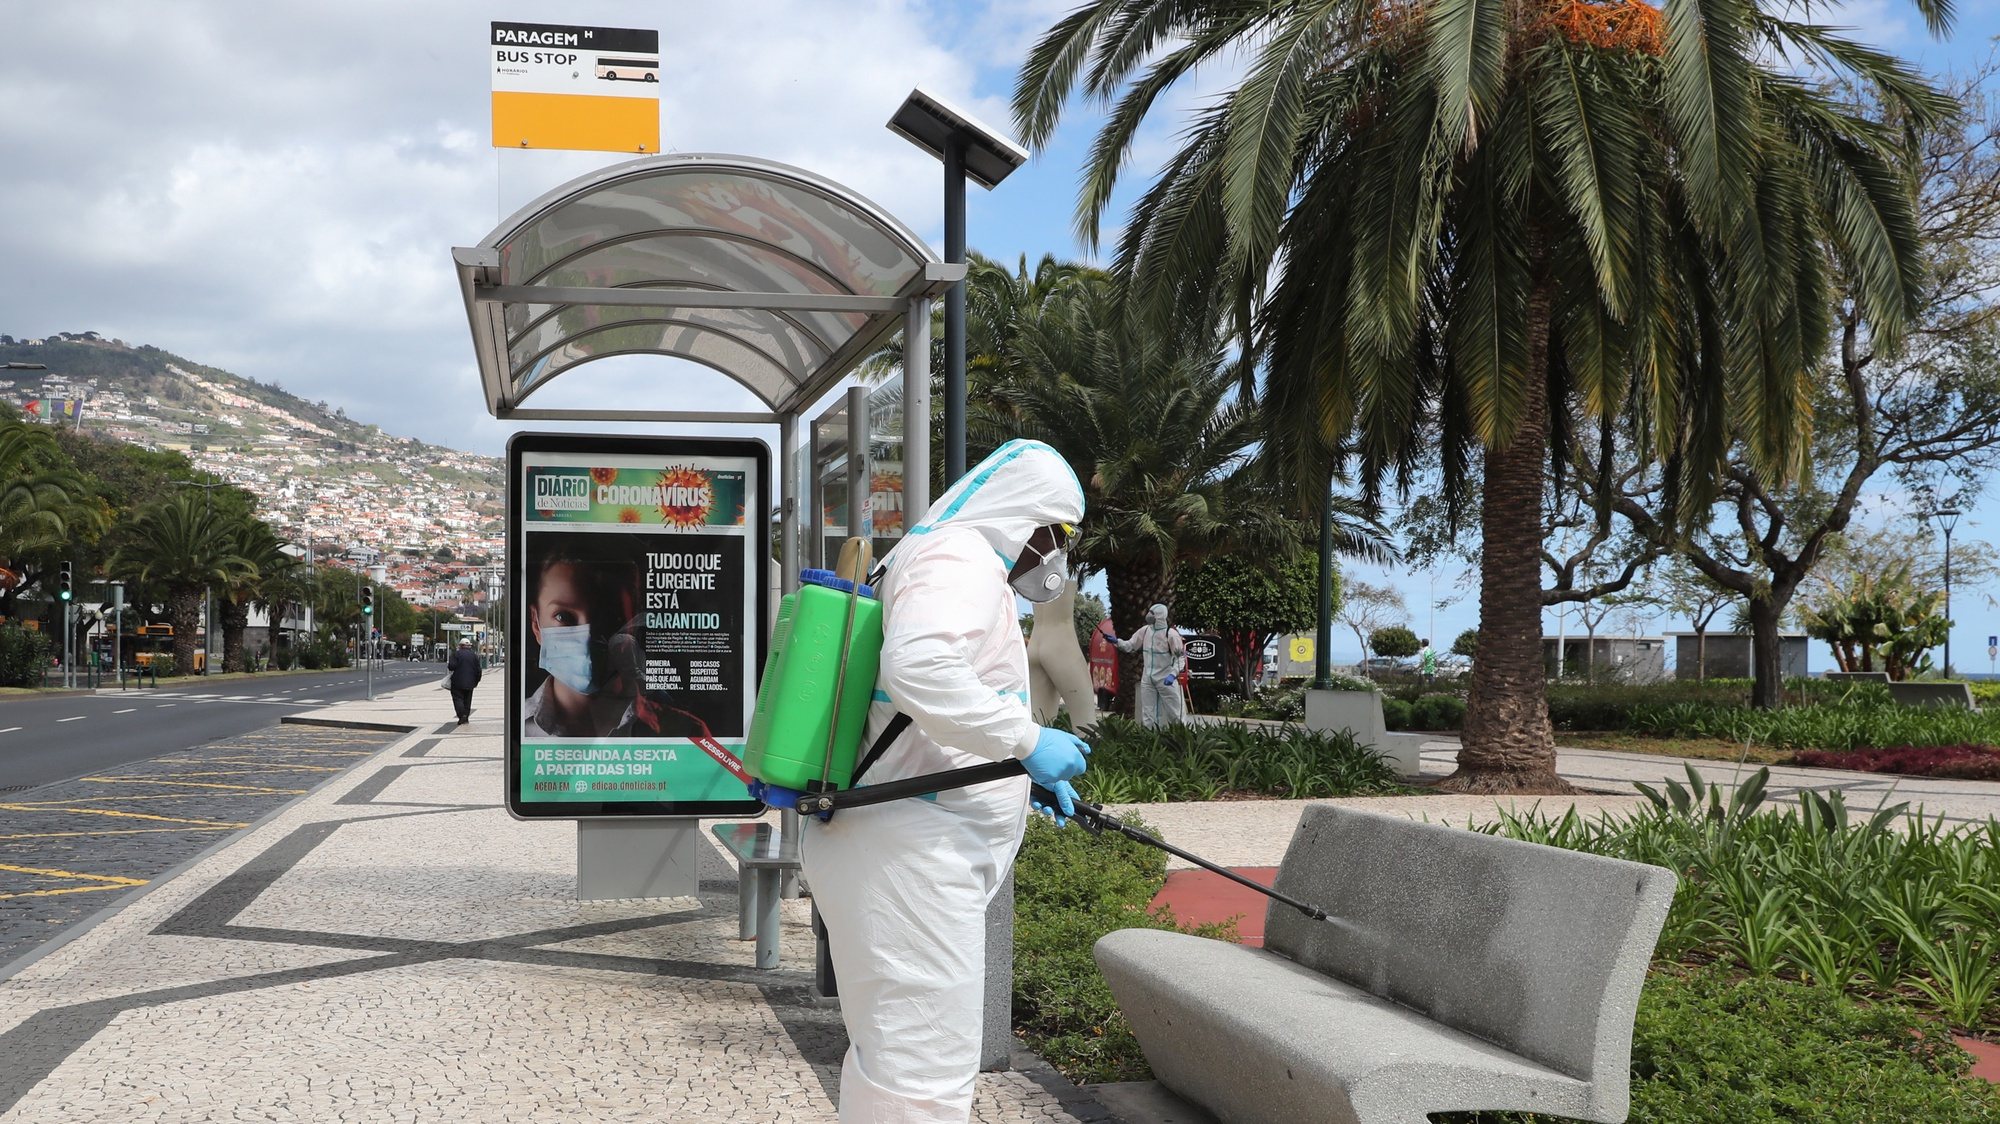 epa08312093 A municipal employee disinfects a street in the centre of Funchal due to the epidemic of covid-19, Madeira Island, Portugal, 21 March 2020. In Portugal, there are 12 deaths and 1,280 confirmed infections. Portugal is in a state of emergency from 00:00 on March 19th until 23:59 on 02 April. Countries around the world are taking increased measures to stem the widespread of the SARS-CoV-2 coronavirus which causes the Covid-19 disease.  EPA/HOMEM DE GOUVEIA